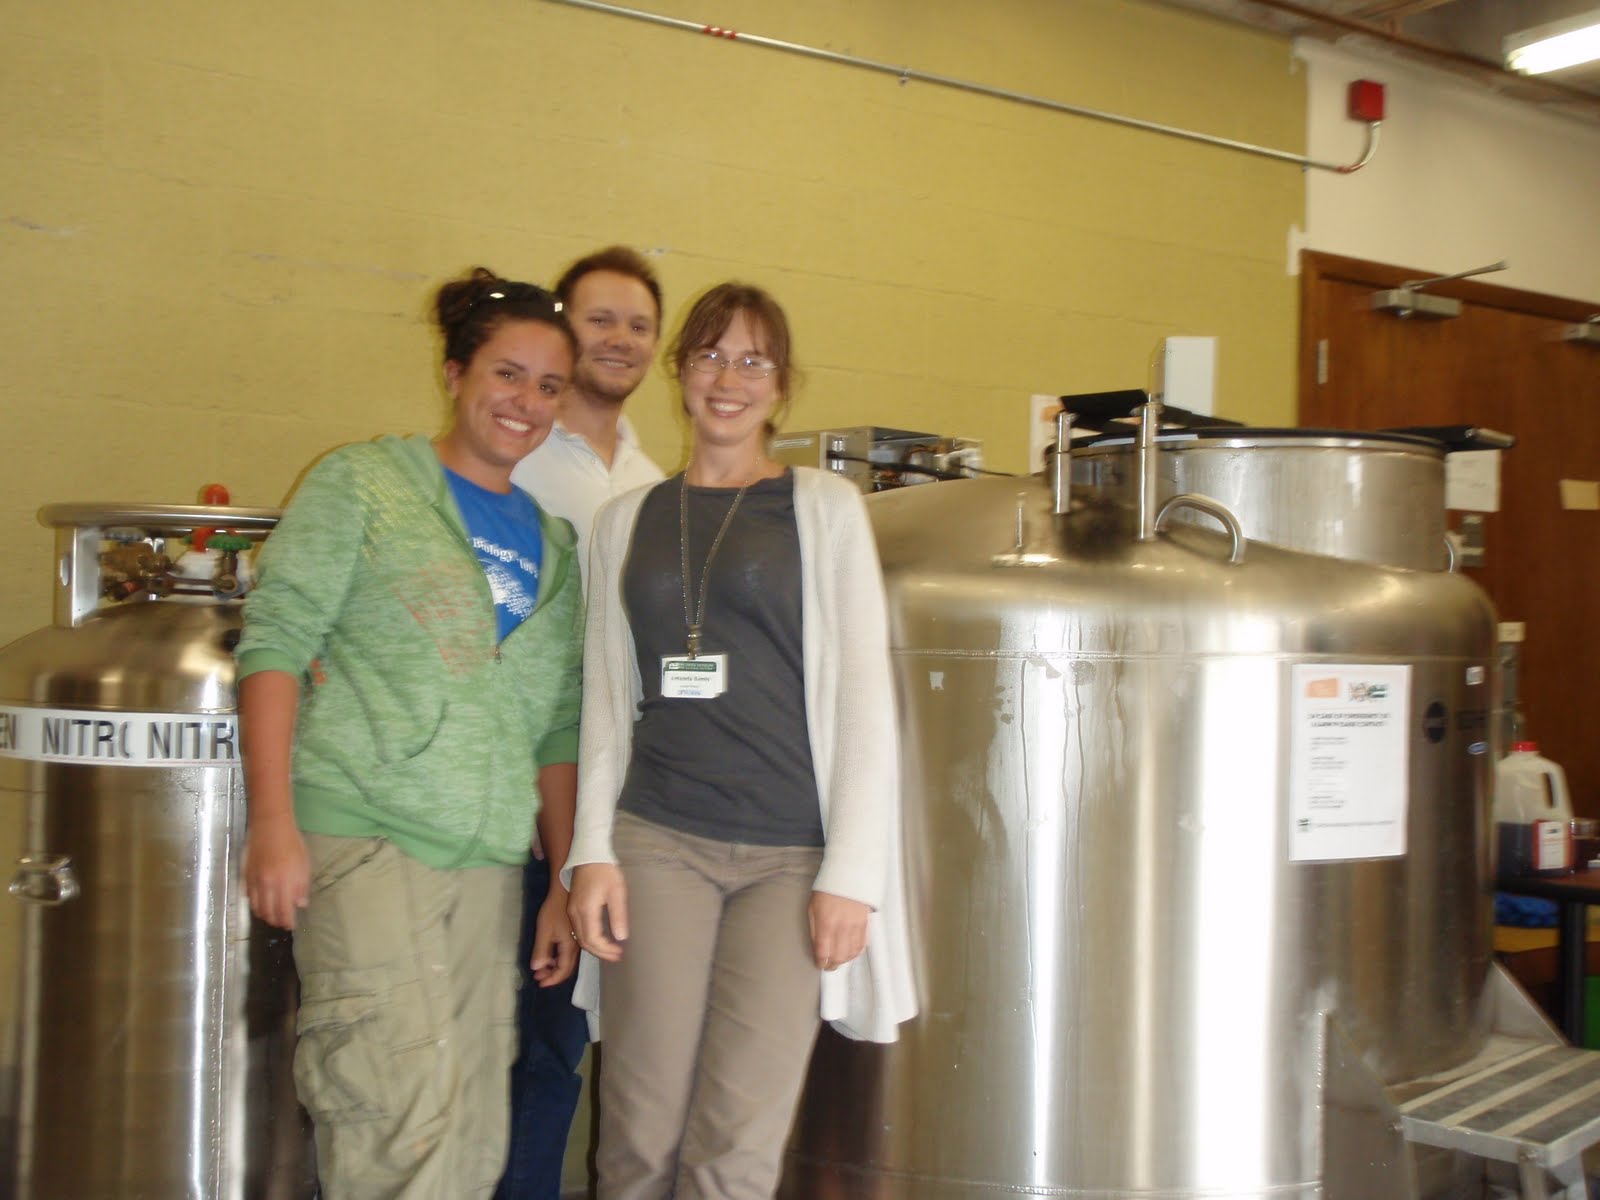 Chelsey, Derek, and Mandy with the cryofreezer